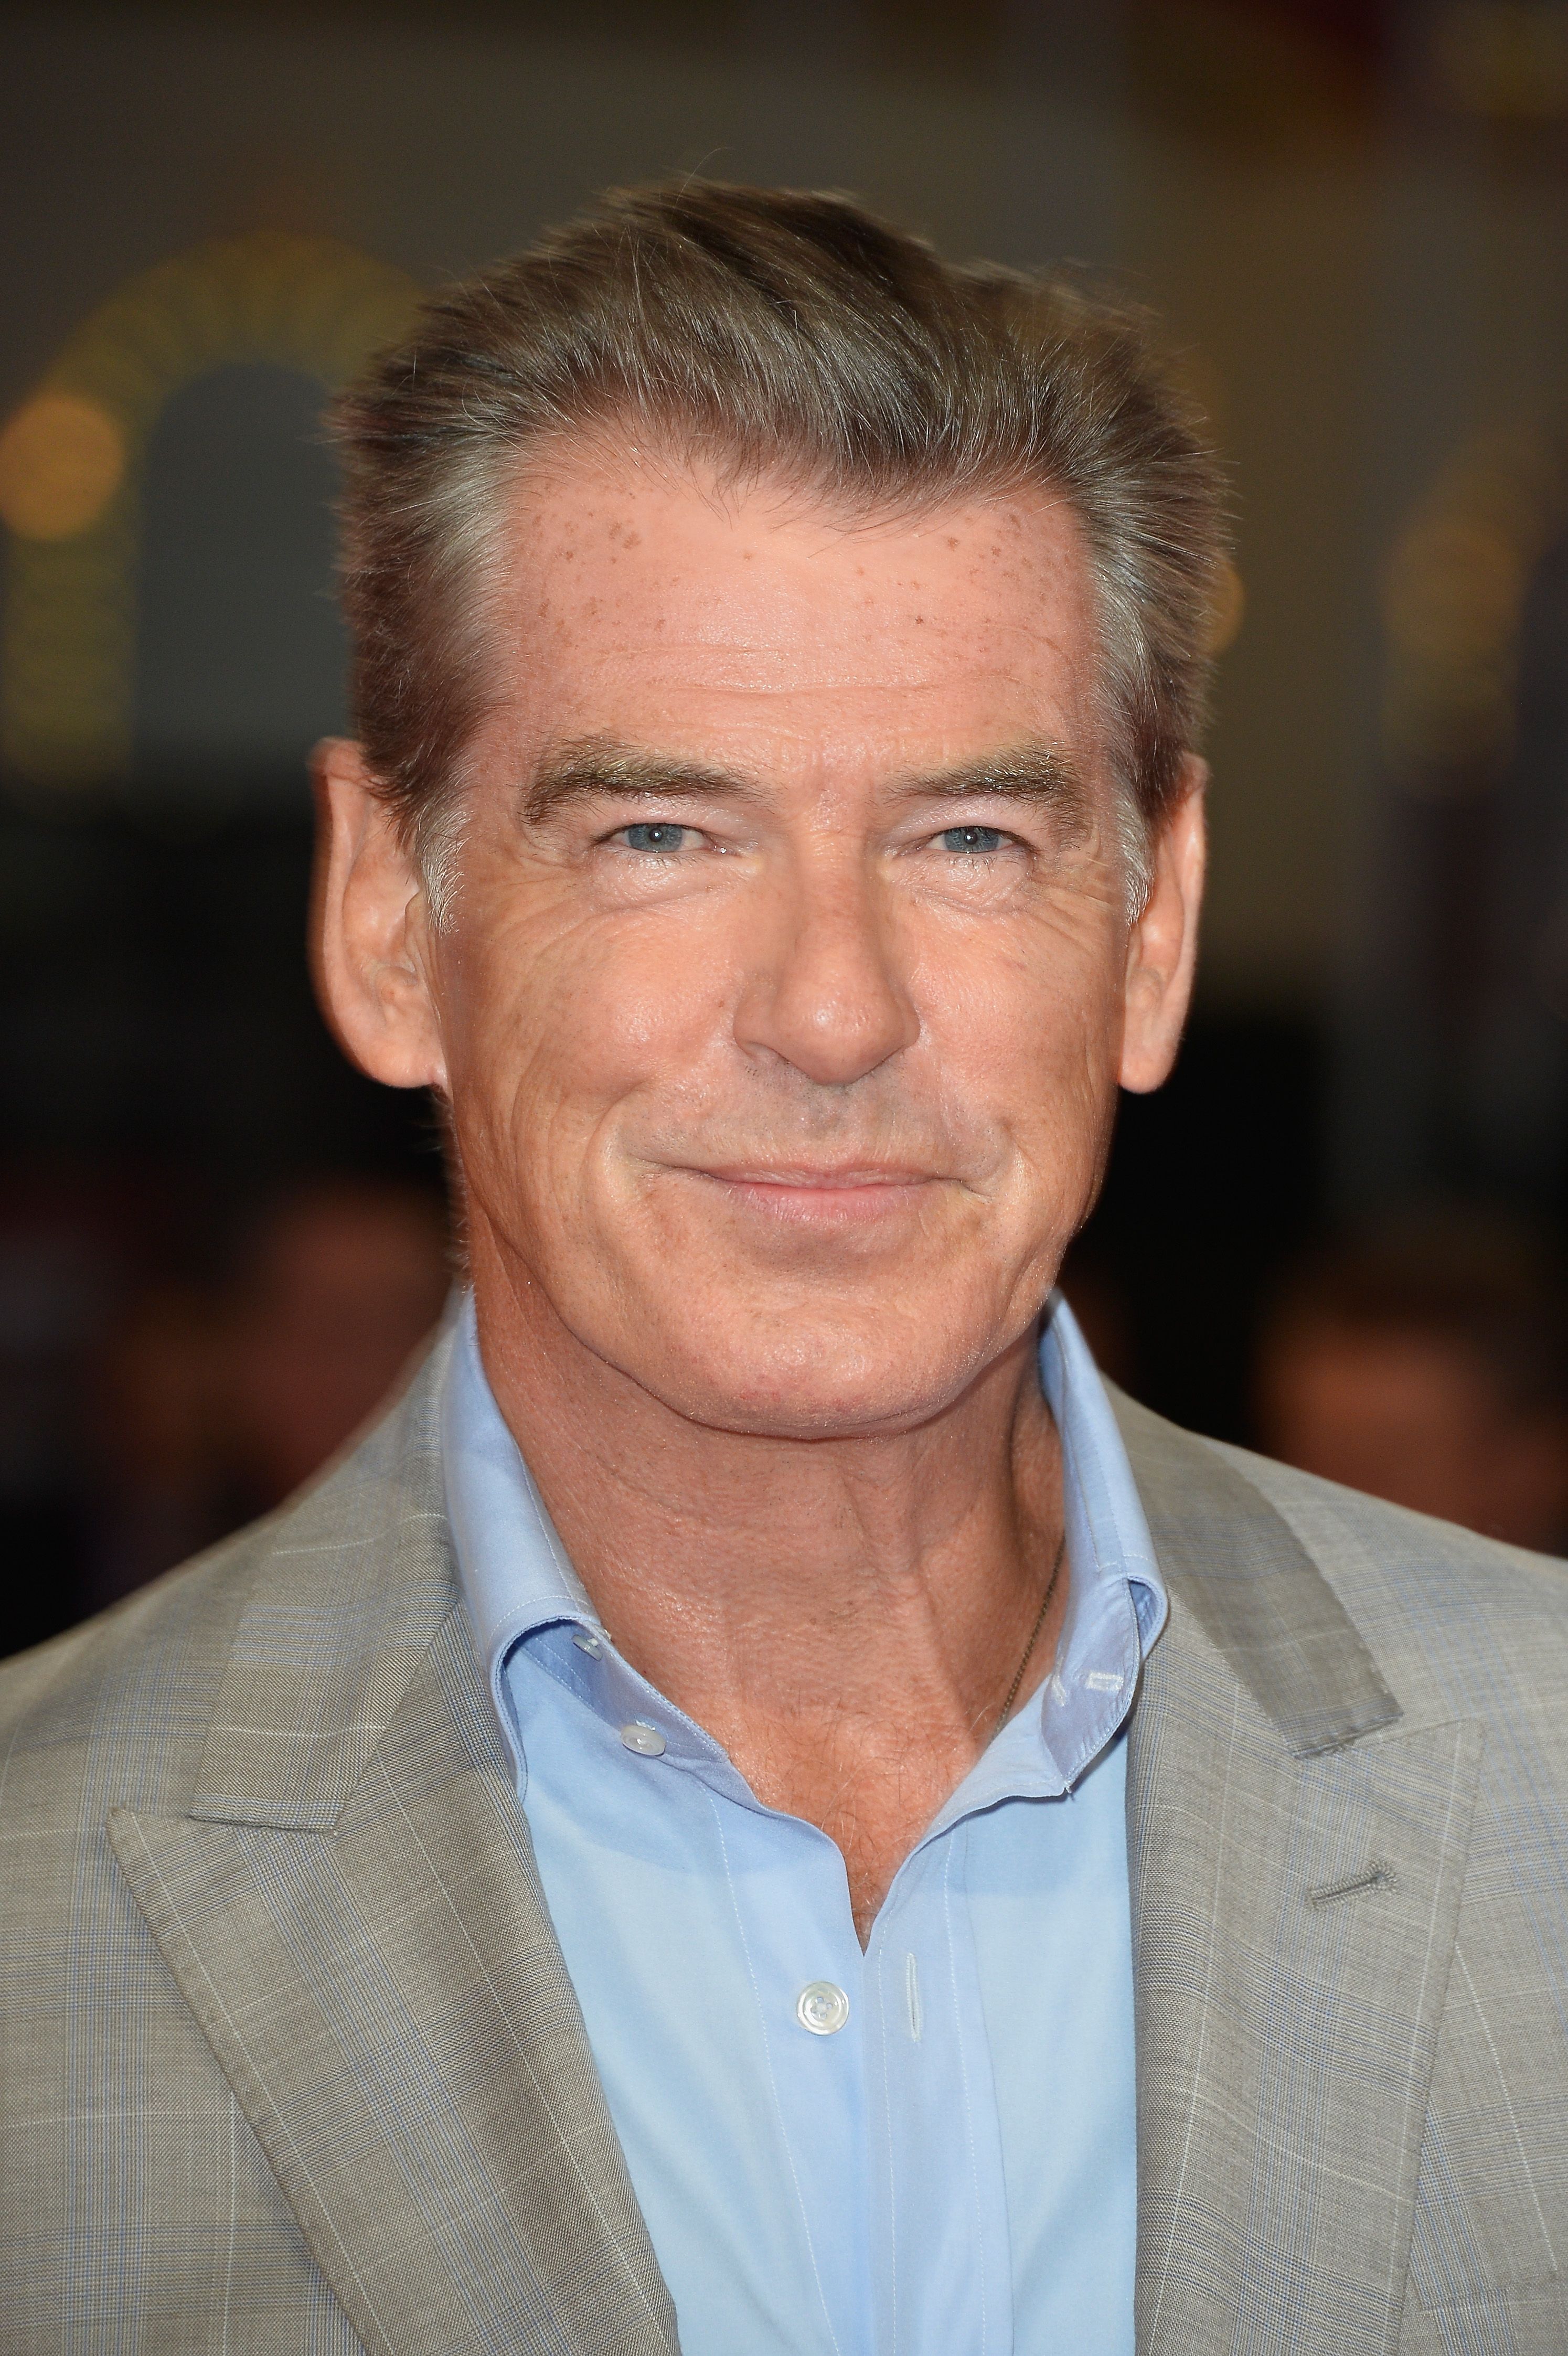 Pierce Brosnam during the 'Pasolini' premiere on September 11, 2014 | Photo: Getty Images